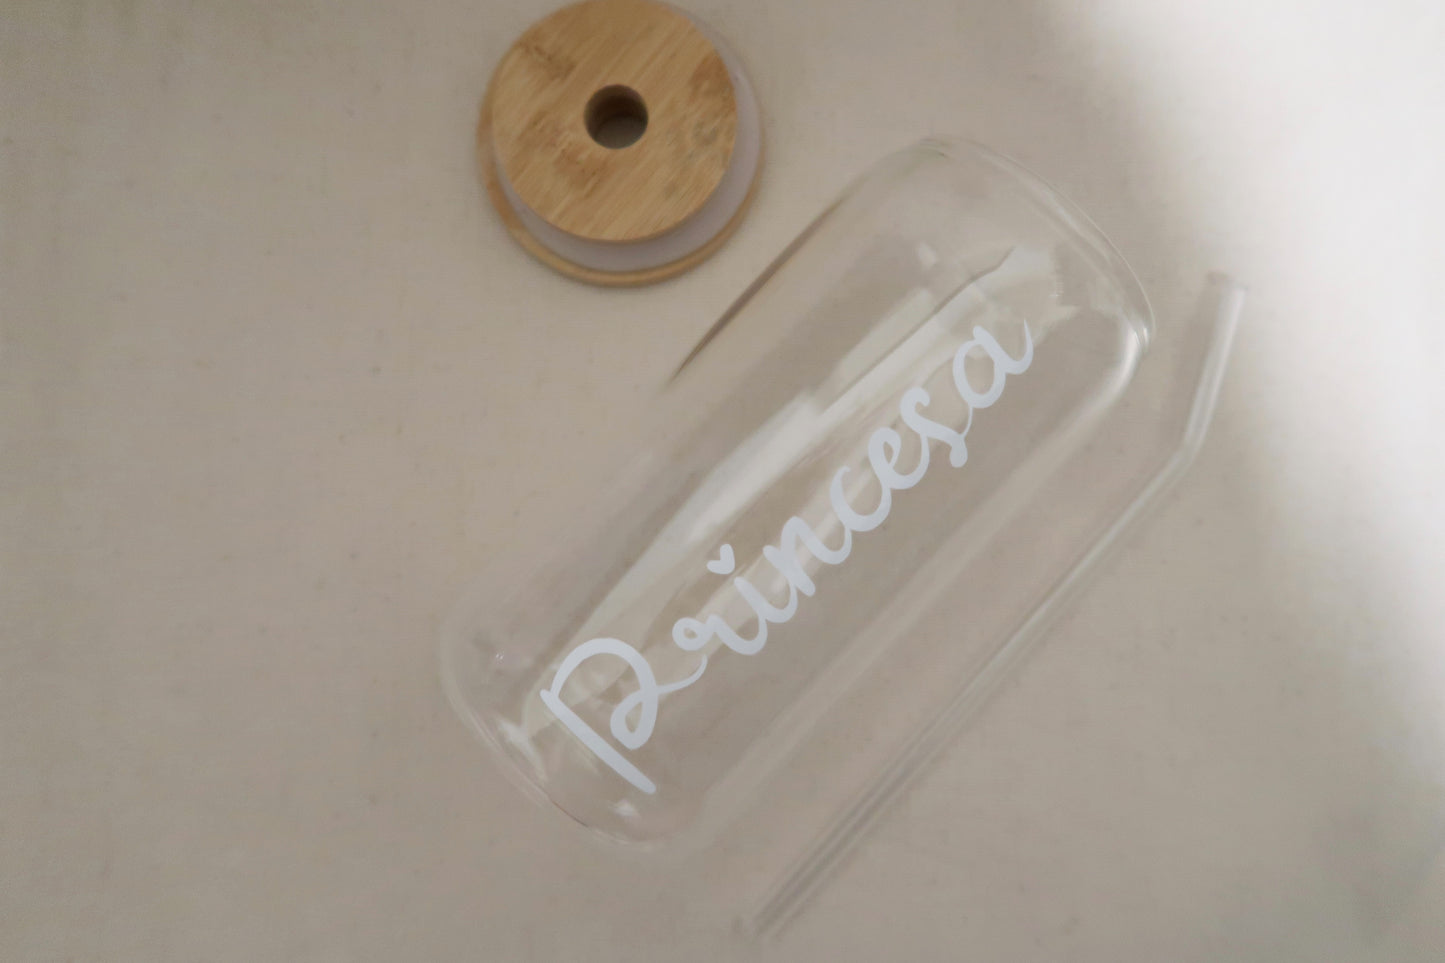 Princesa personalized glass can 